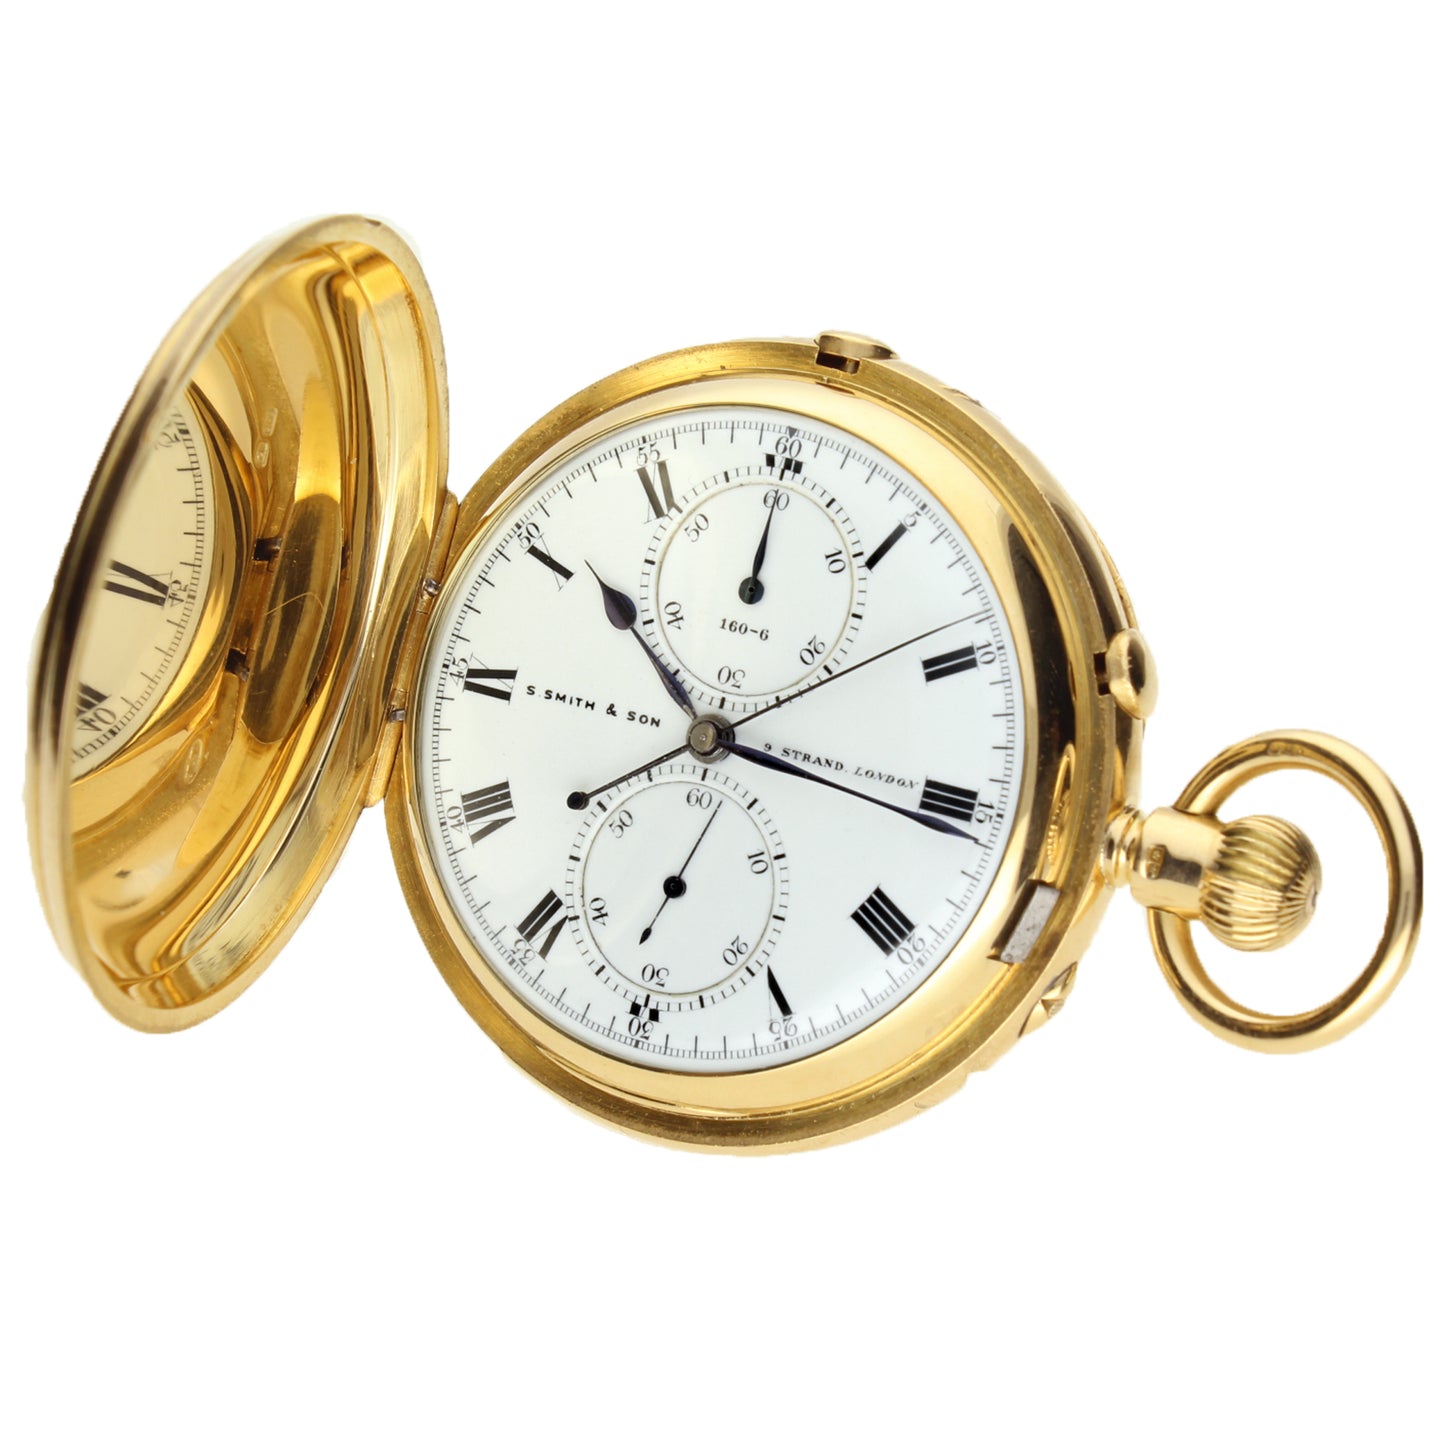 18ct yellow gold Smith & Son, full hunter split second pocketwatch. Made 1903